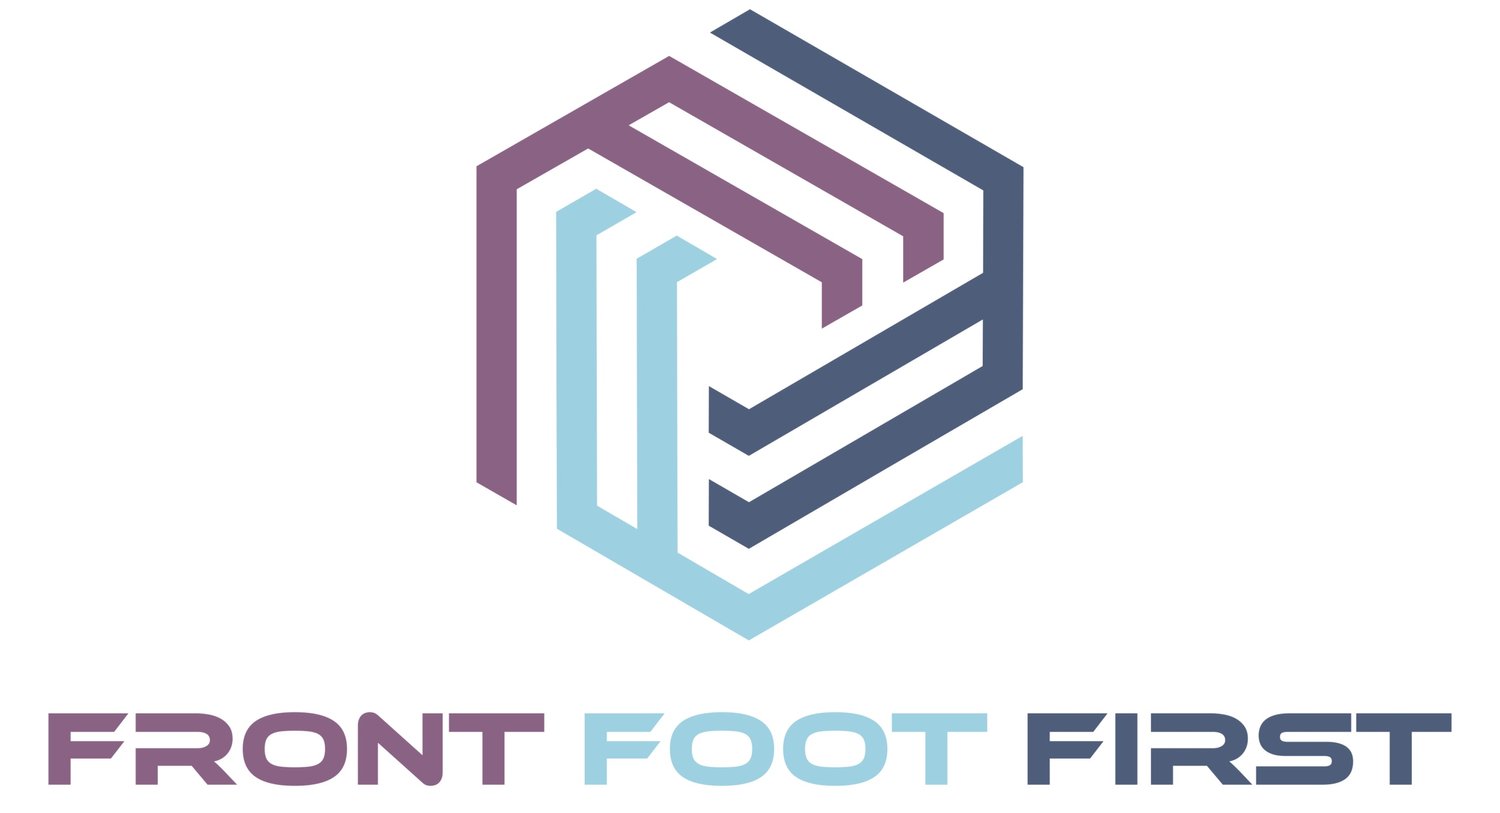 FRONT FOOT FIRST